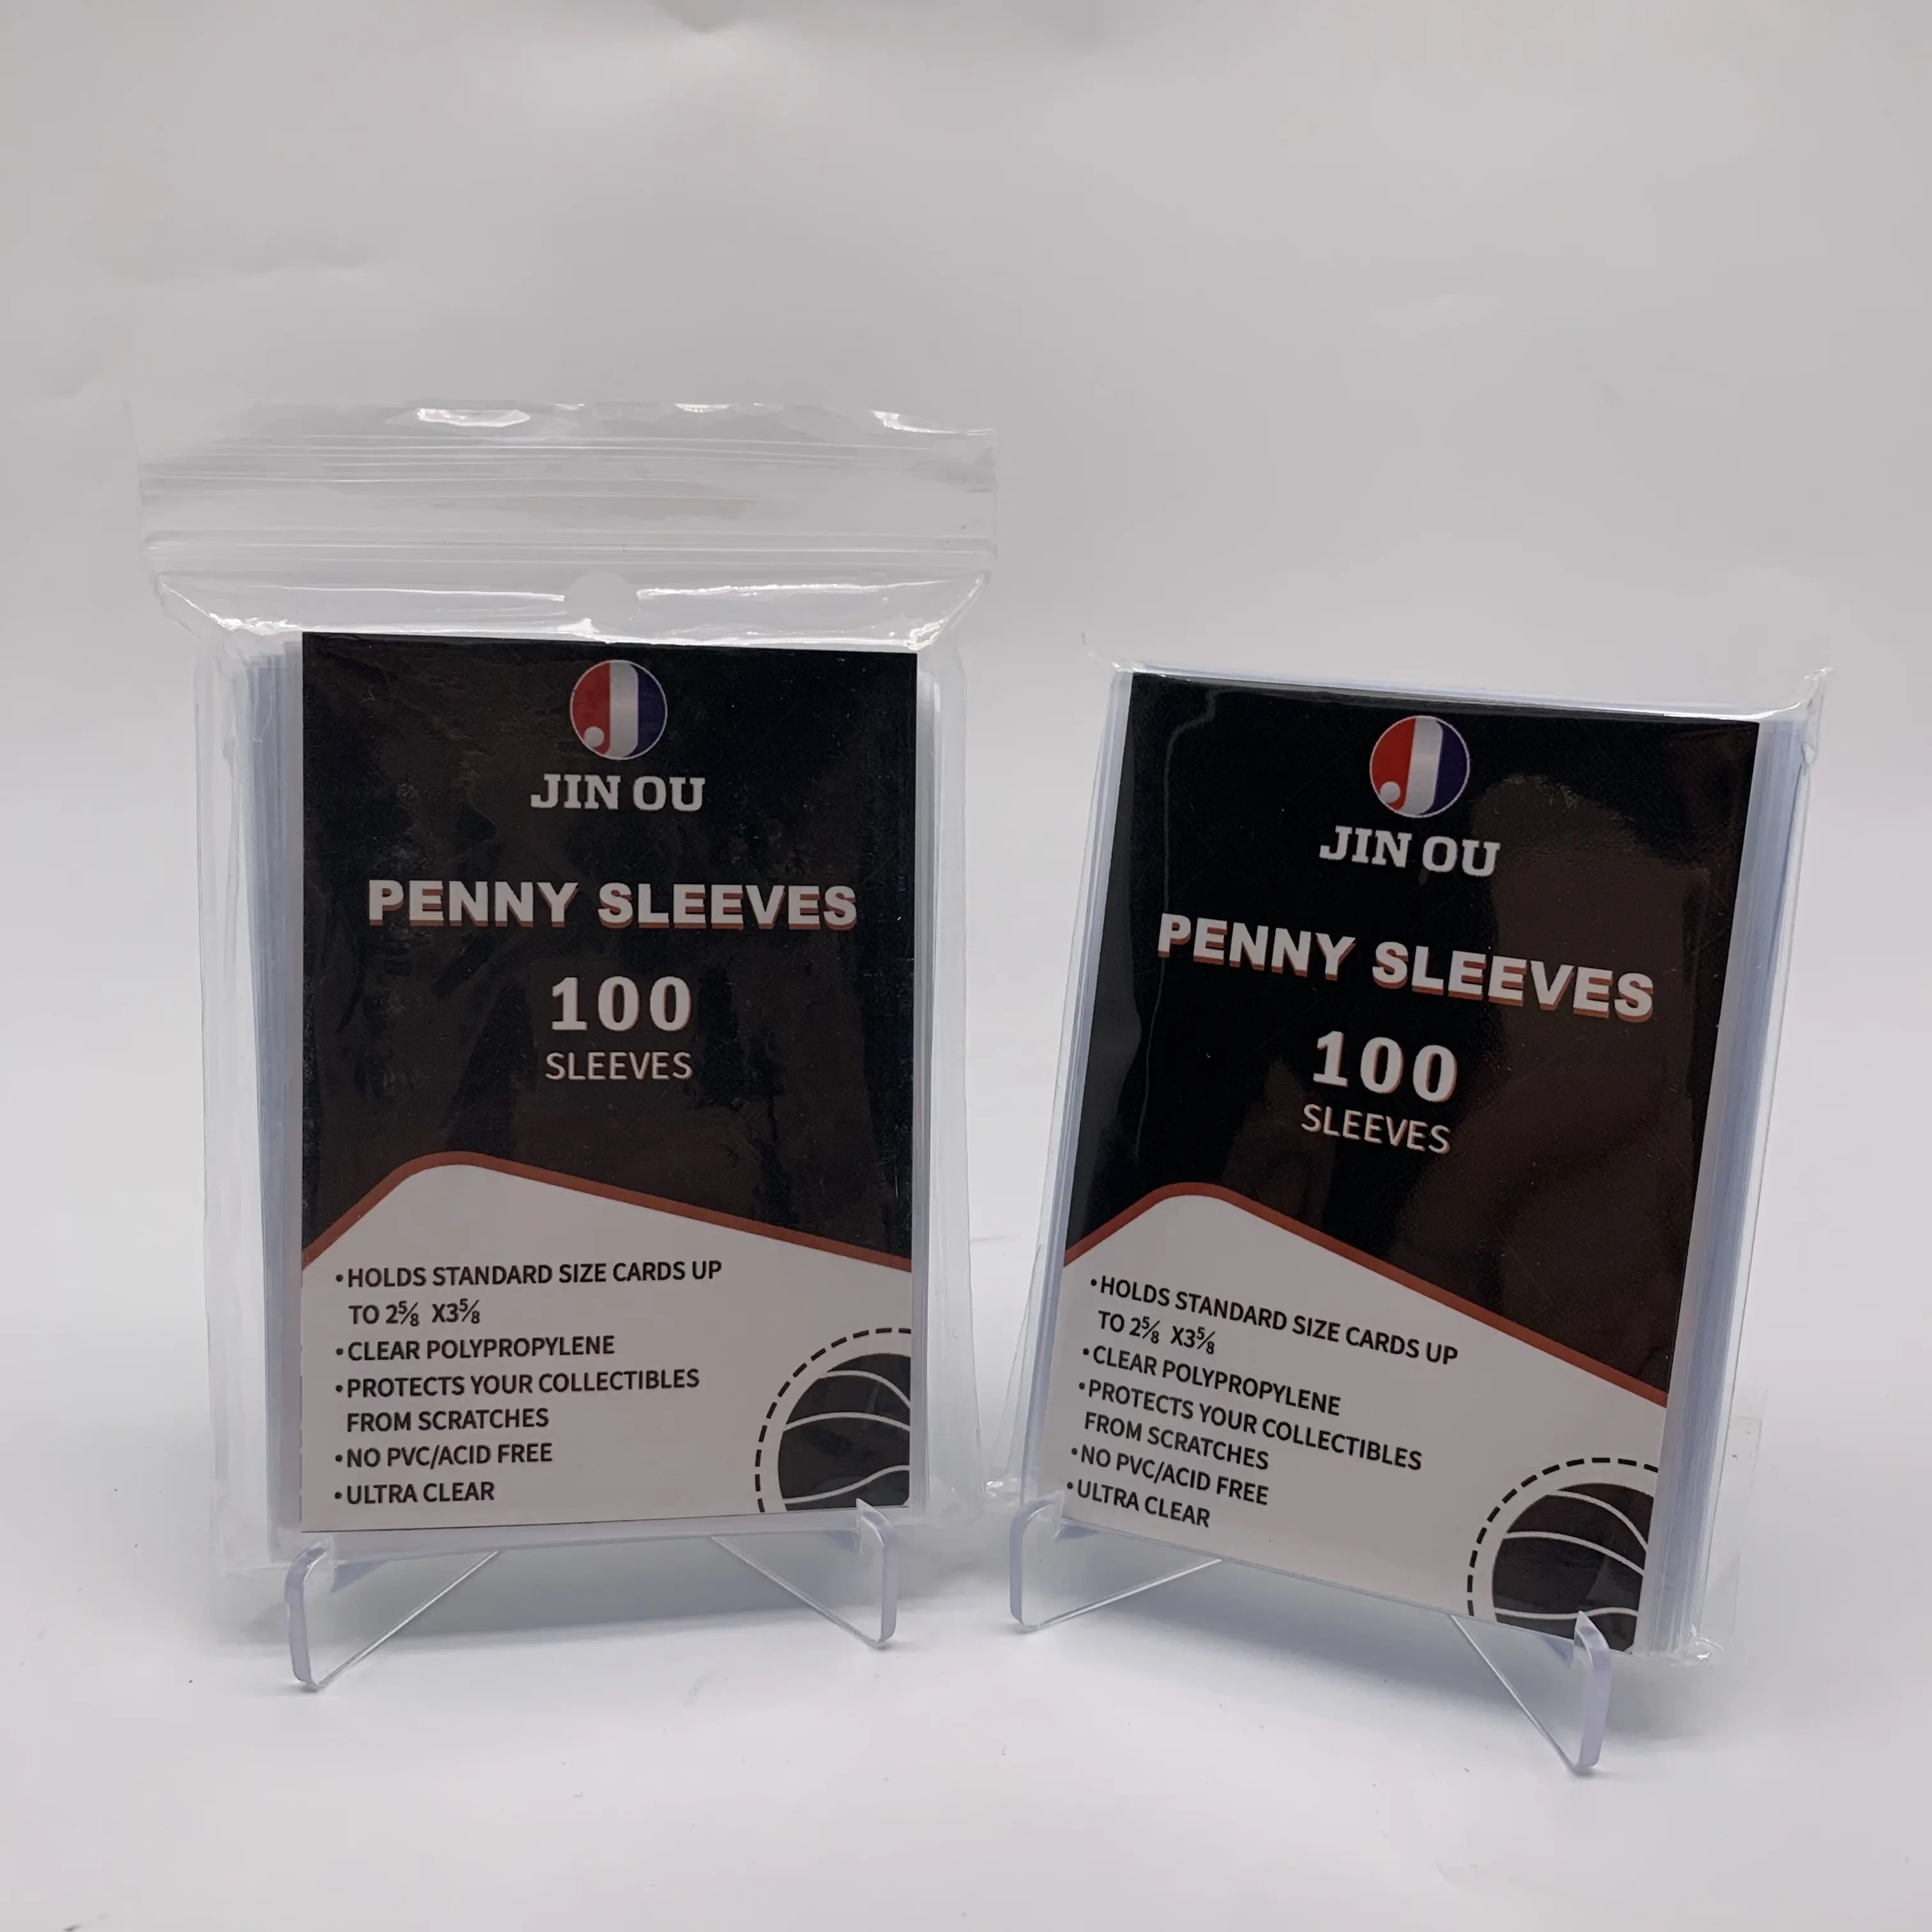 Factory price Soft sleeves penny sleeves in stock with fast delivery JO-AP-001PS,Toploader